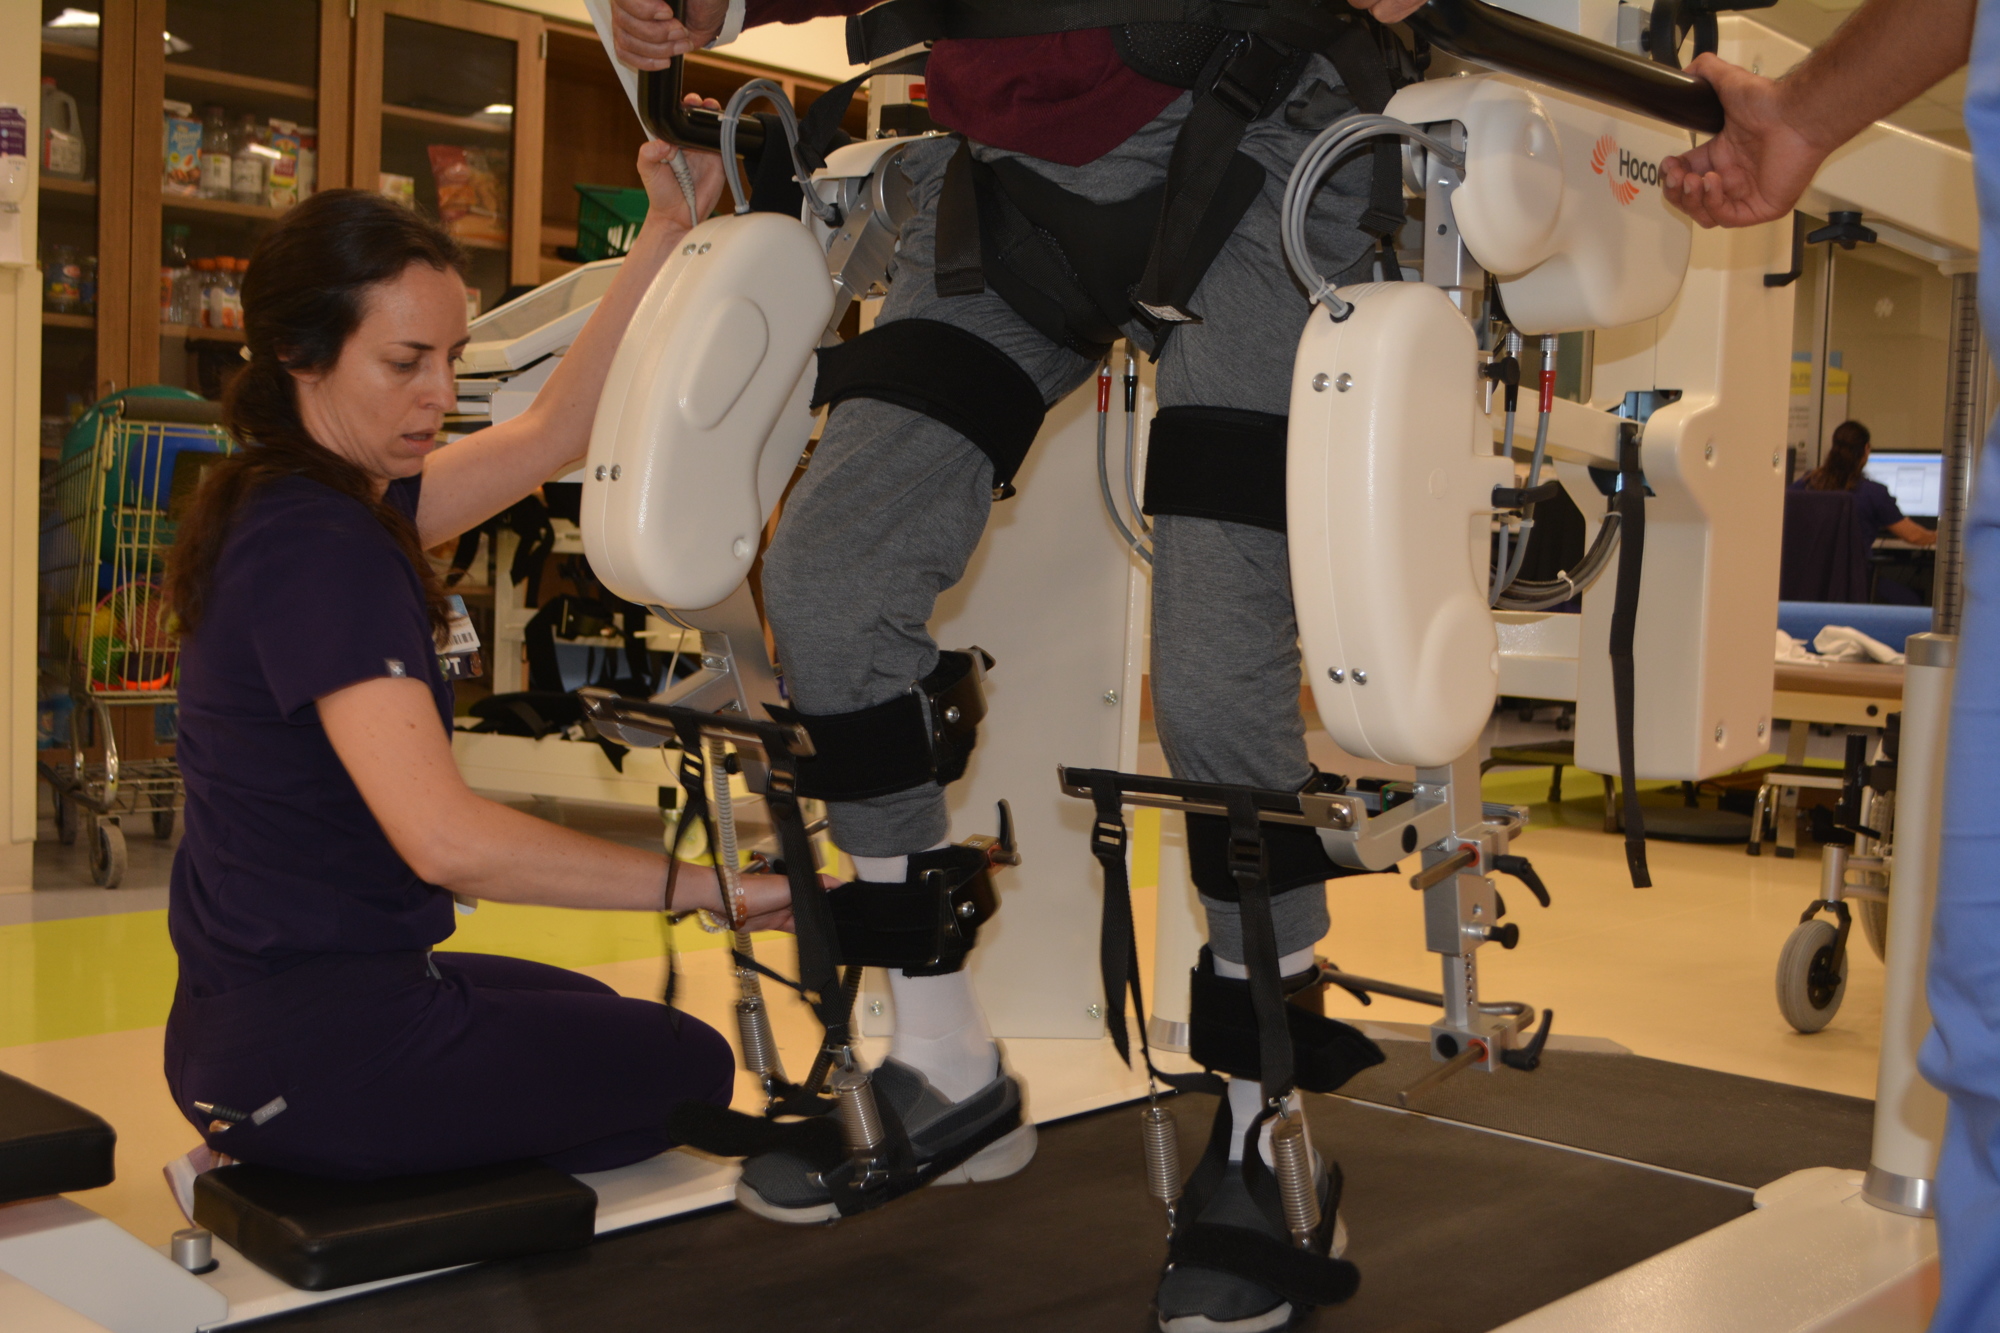 Physical therapist Dr. Julia Figueroa (kneeling) watches stroke patient Ronald Serres walk using the Hocoma Lokomat. Figureoa can adjust the weight distribution on Serres' body based on how he's responding.